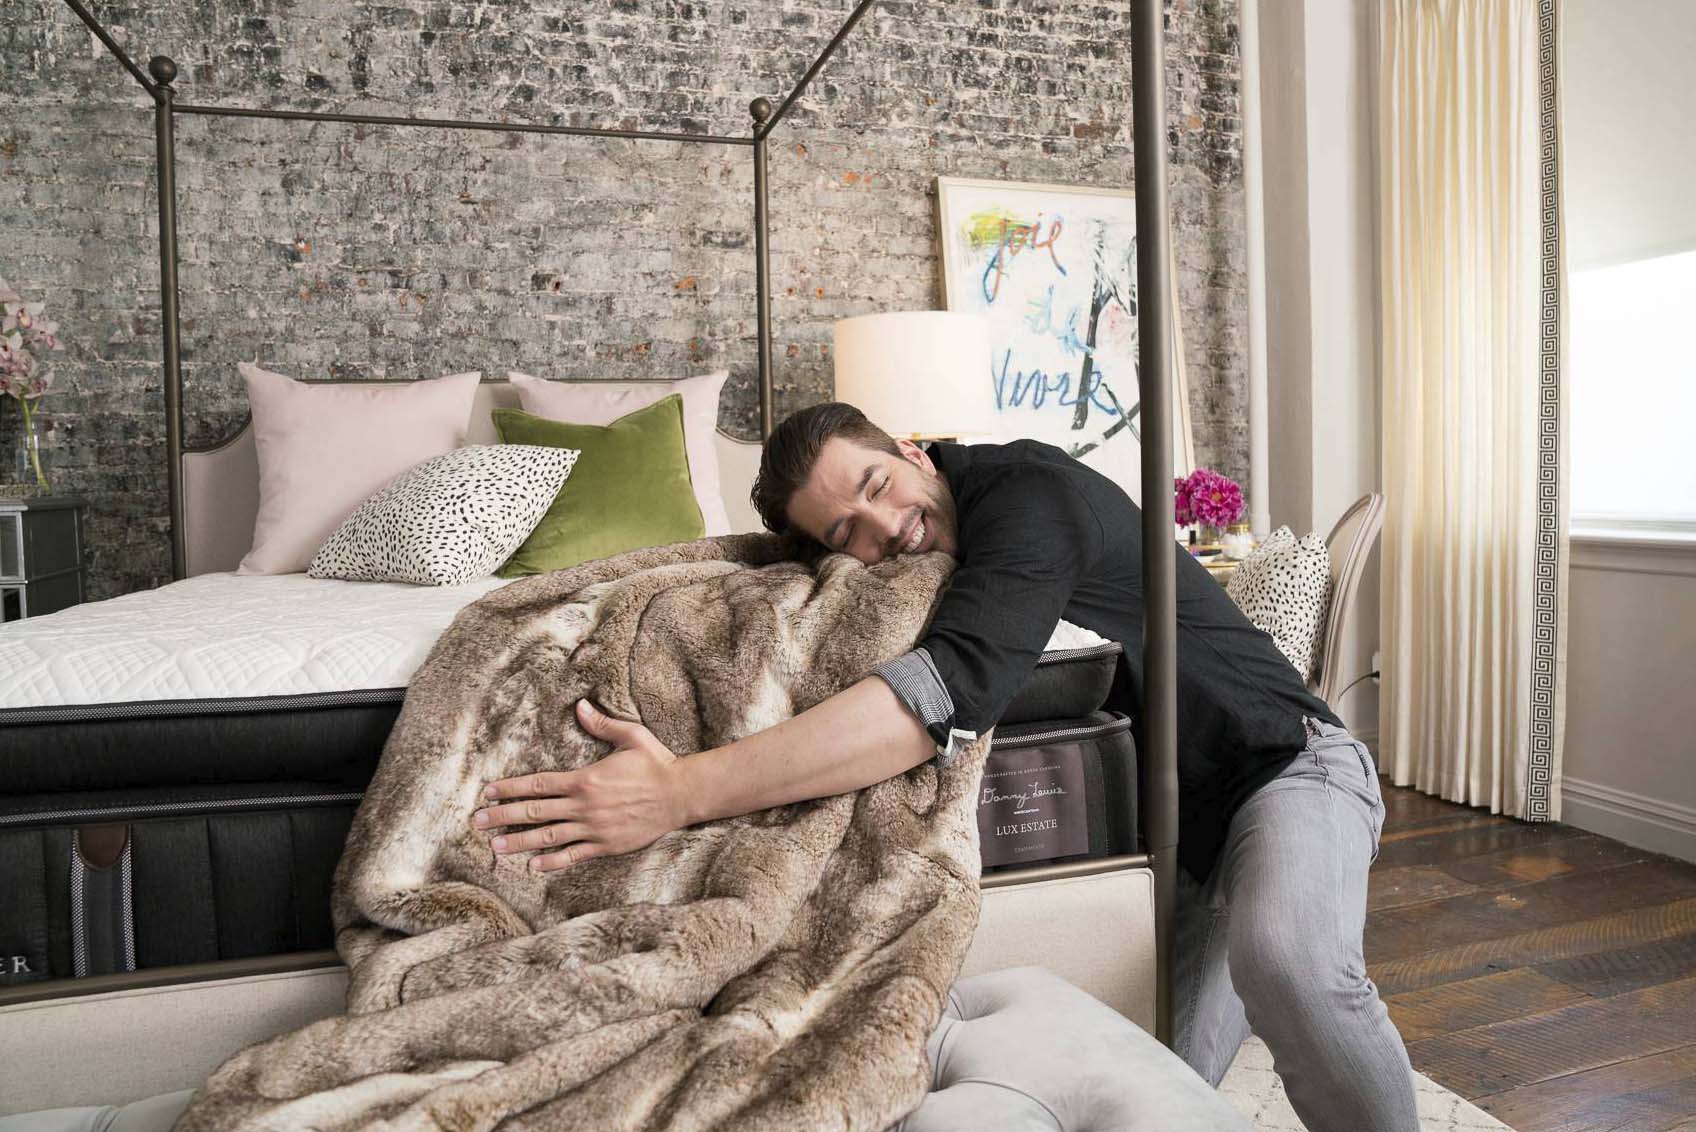 Jonathan Scott Shows It's Hard To Get Up From The Lux Estate In The Edgy Glam Room